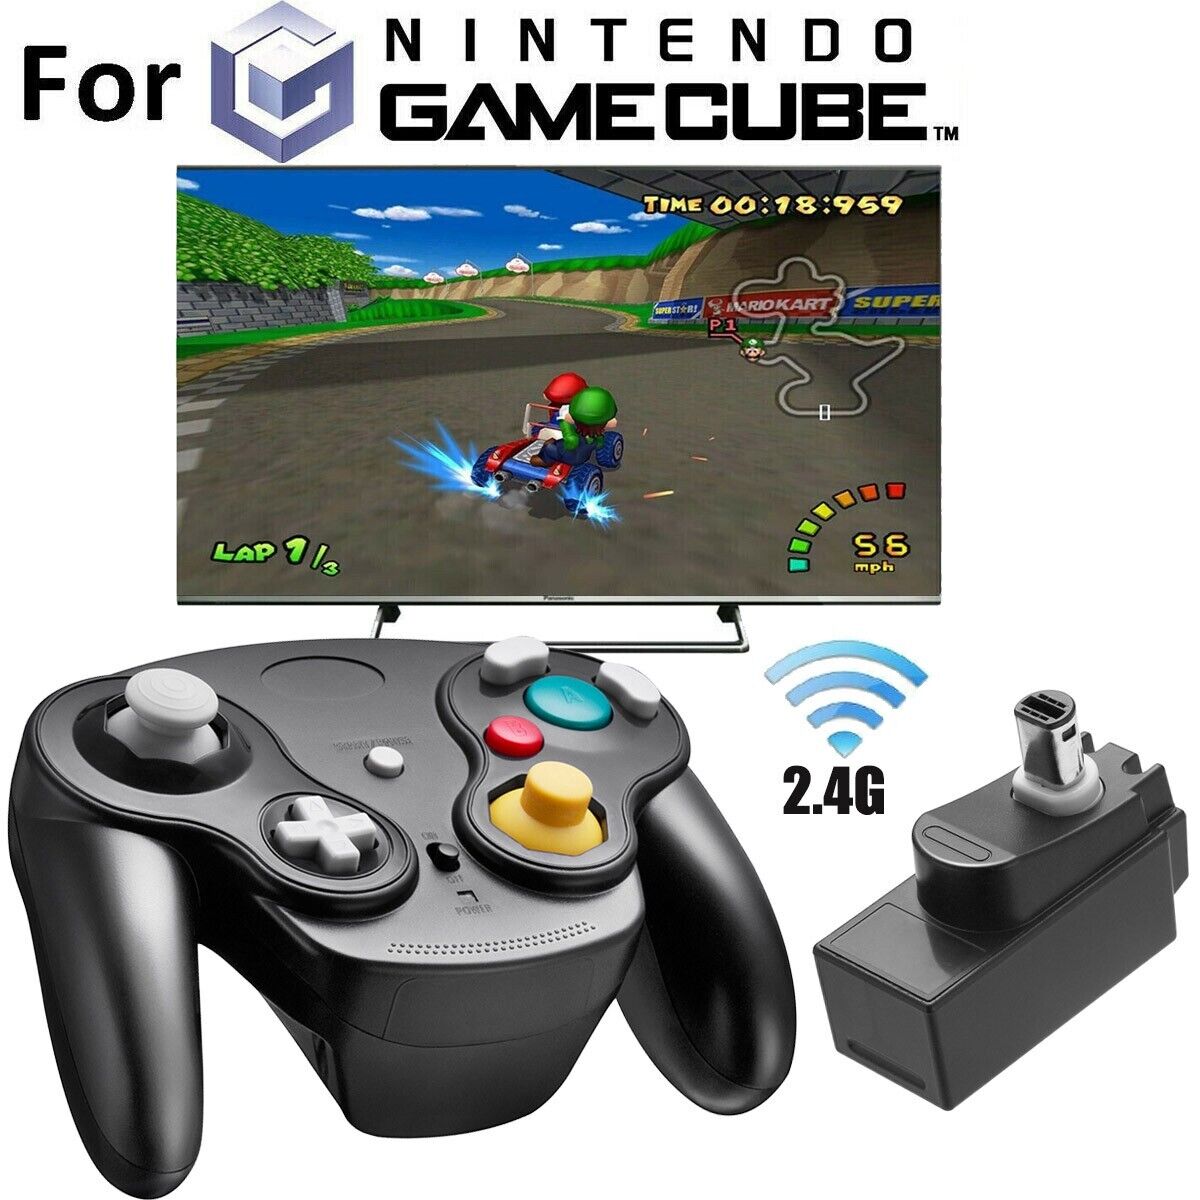 2.4G Wireless Controller Gamepad Joystick for Nintendo GameCube NGC Console Unbranded